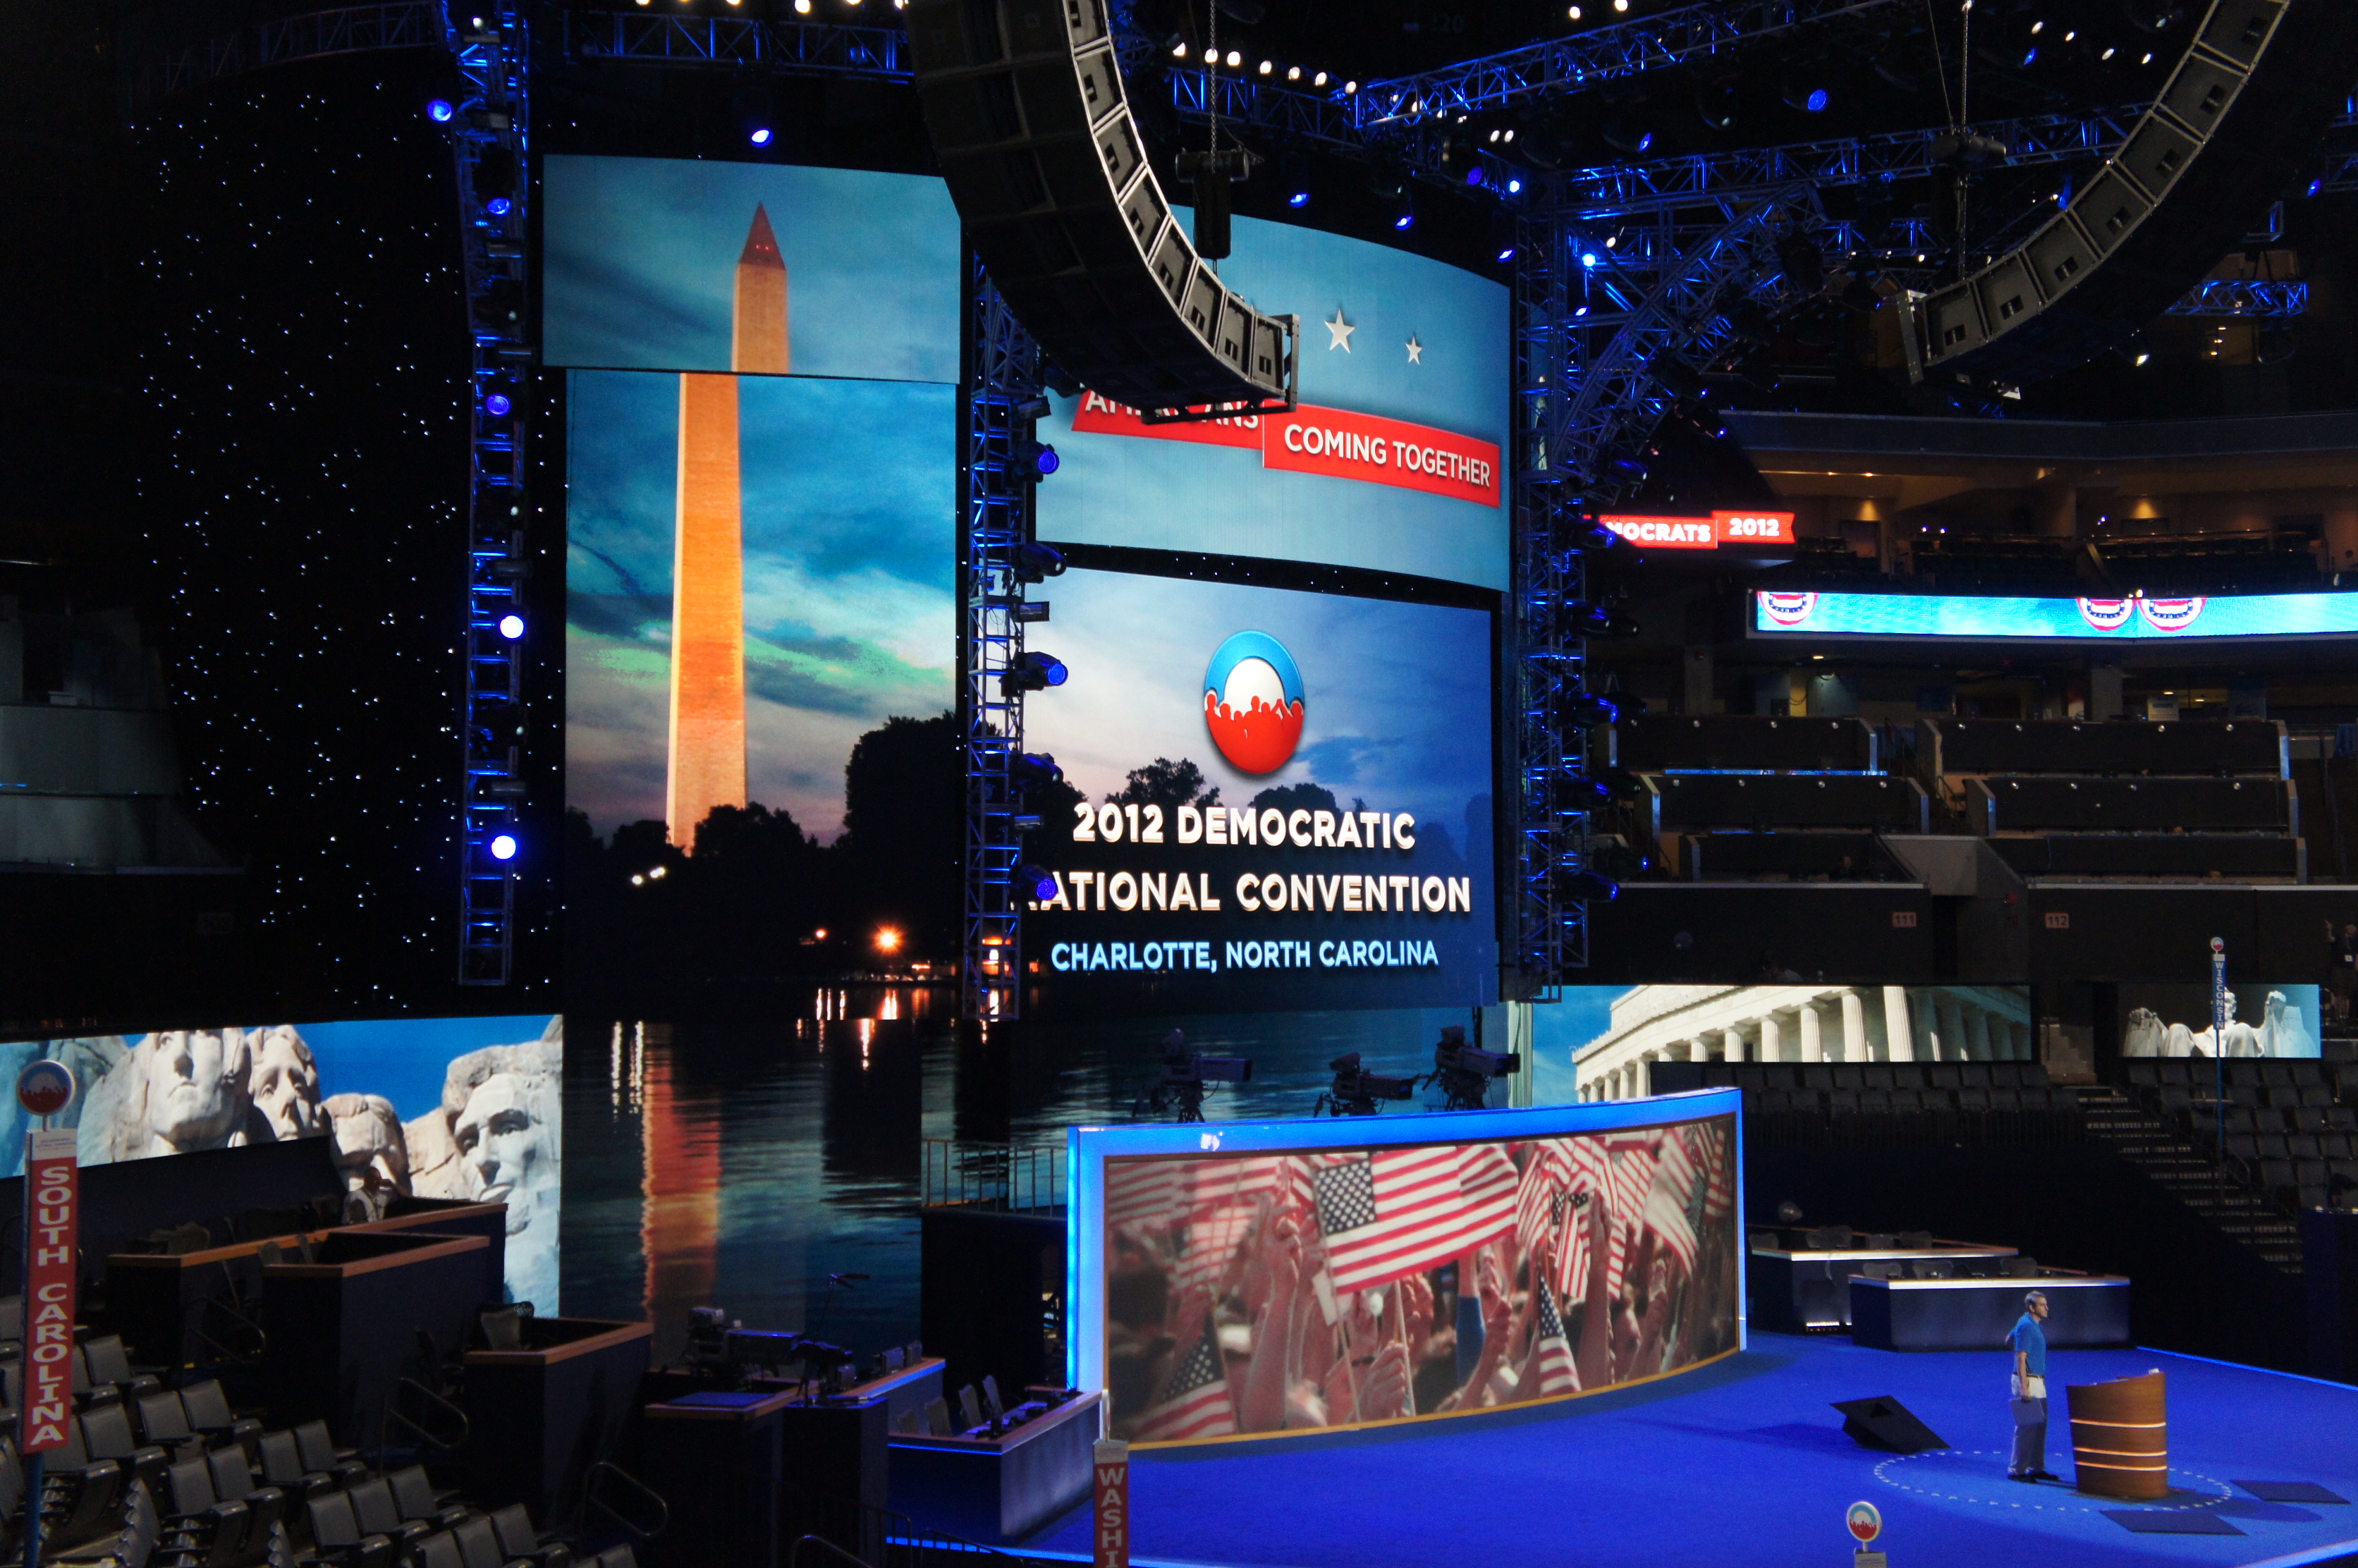 The 2012 Democratic National Convention in Charlotte